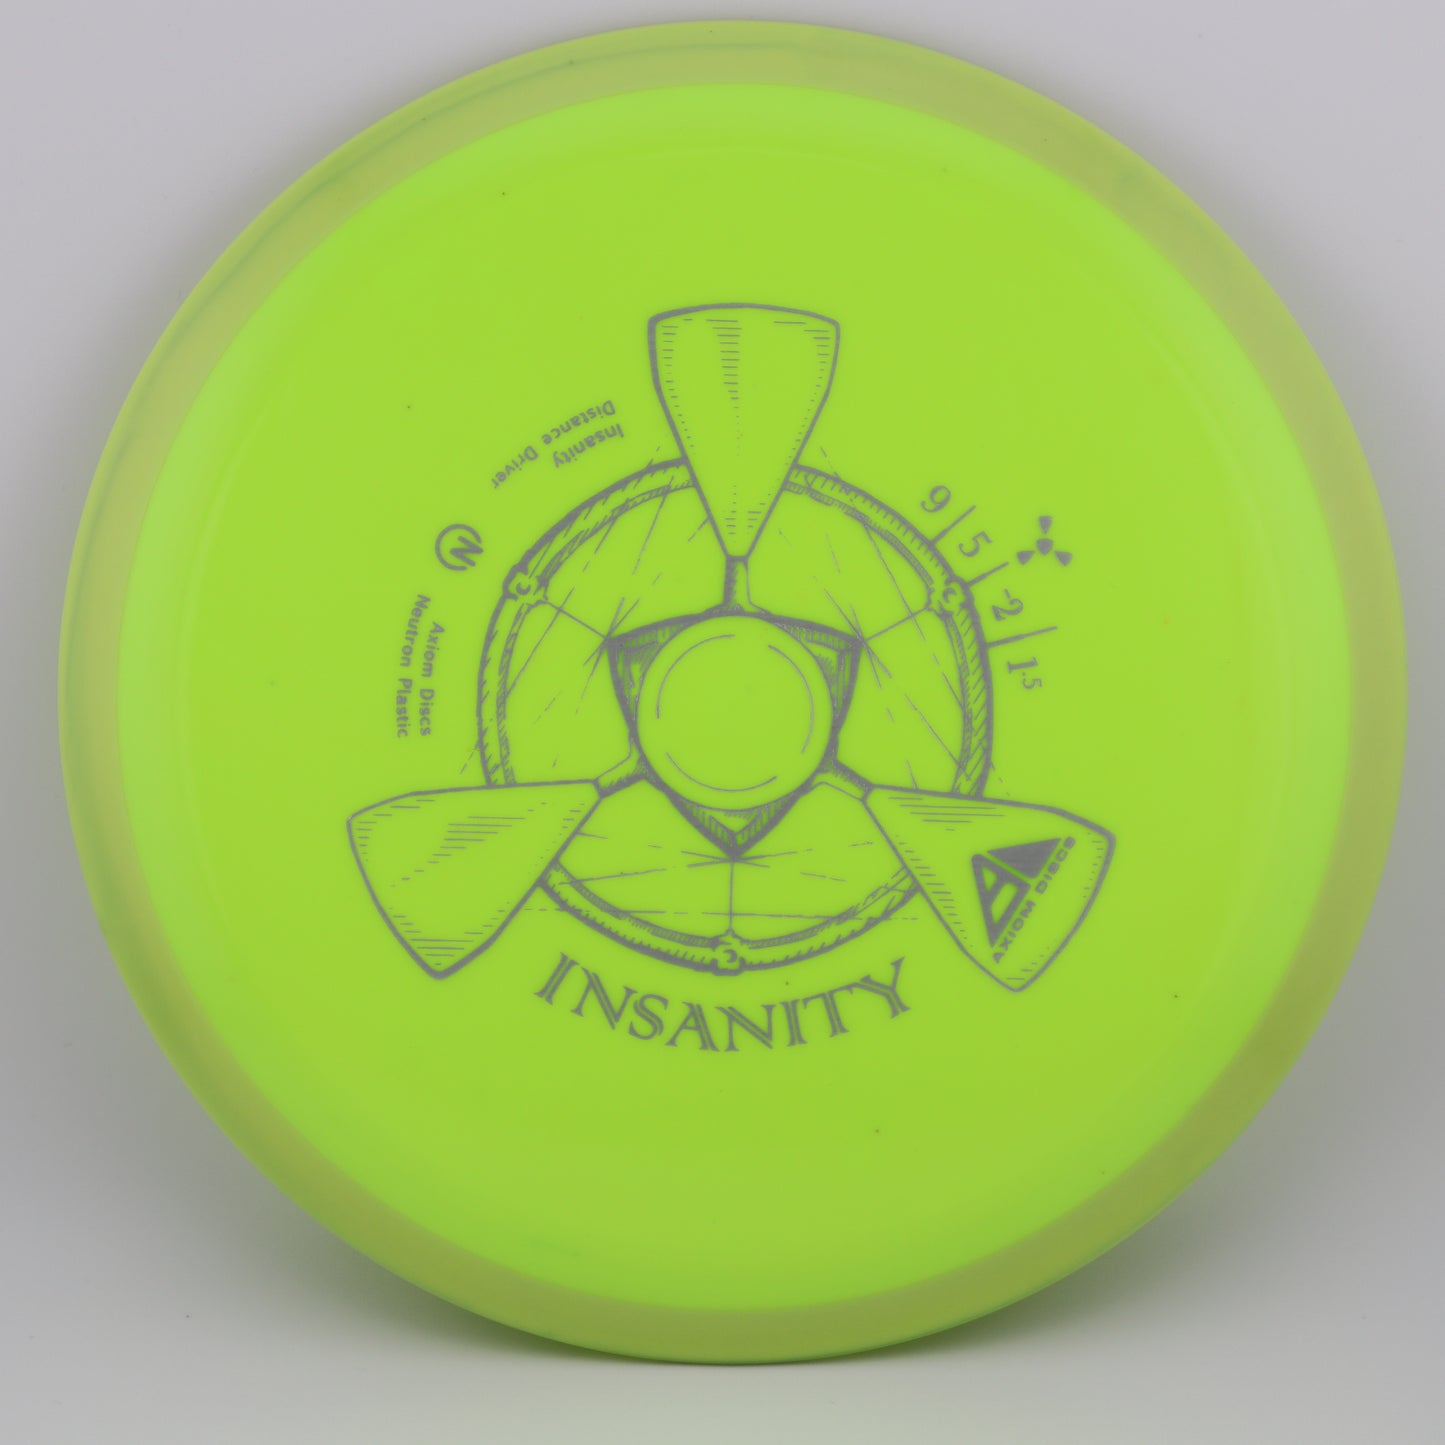 Axiom Discs Insanity Understable Distance Driver Disc Golf